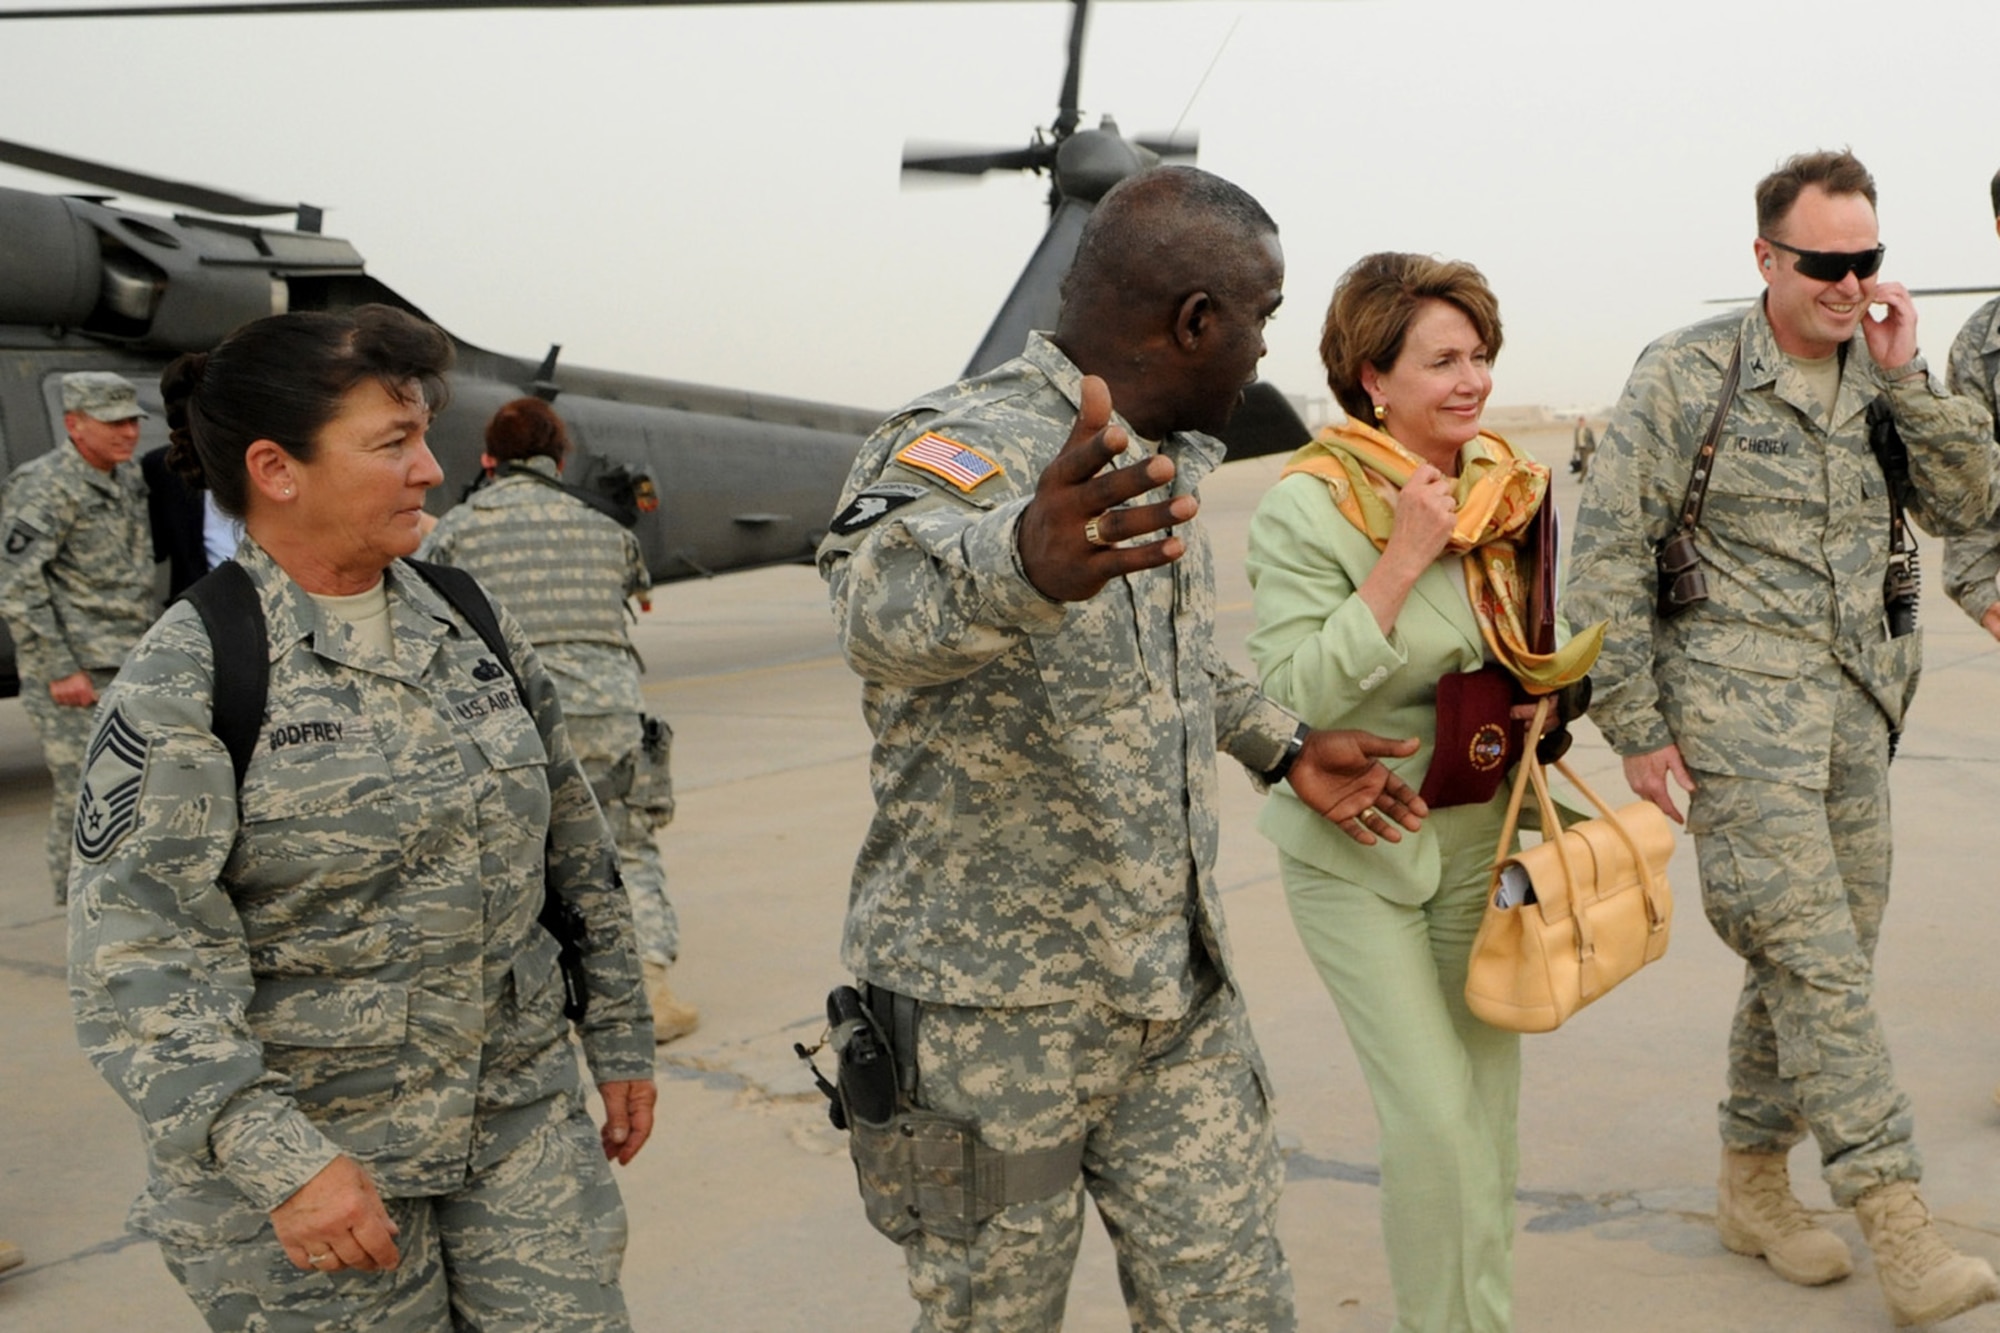 SATHER AIR BASE, Iraq -- Col. Fred Cheney (right), 447th Air Expeditionary Group commander, along with Chief Master Sgt. Kathryn Godfrey (left), 447th Air Expeditionary Group superintendent and Command Sgt. Maj. Marvin Hill, Command Sergeant Major, Multi-National Force - Iraq, lead Speaker of the House, Nancy Pelosi, to meet Airmen and Soldiers of Sather Air Base May 17. (U.S. Air Force photo/Tech. Sgt. Amanda Callahan)